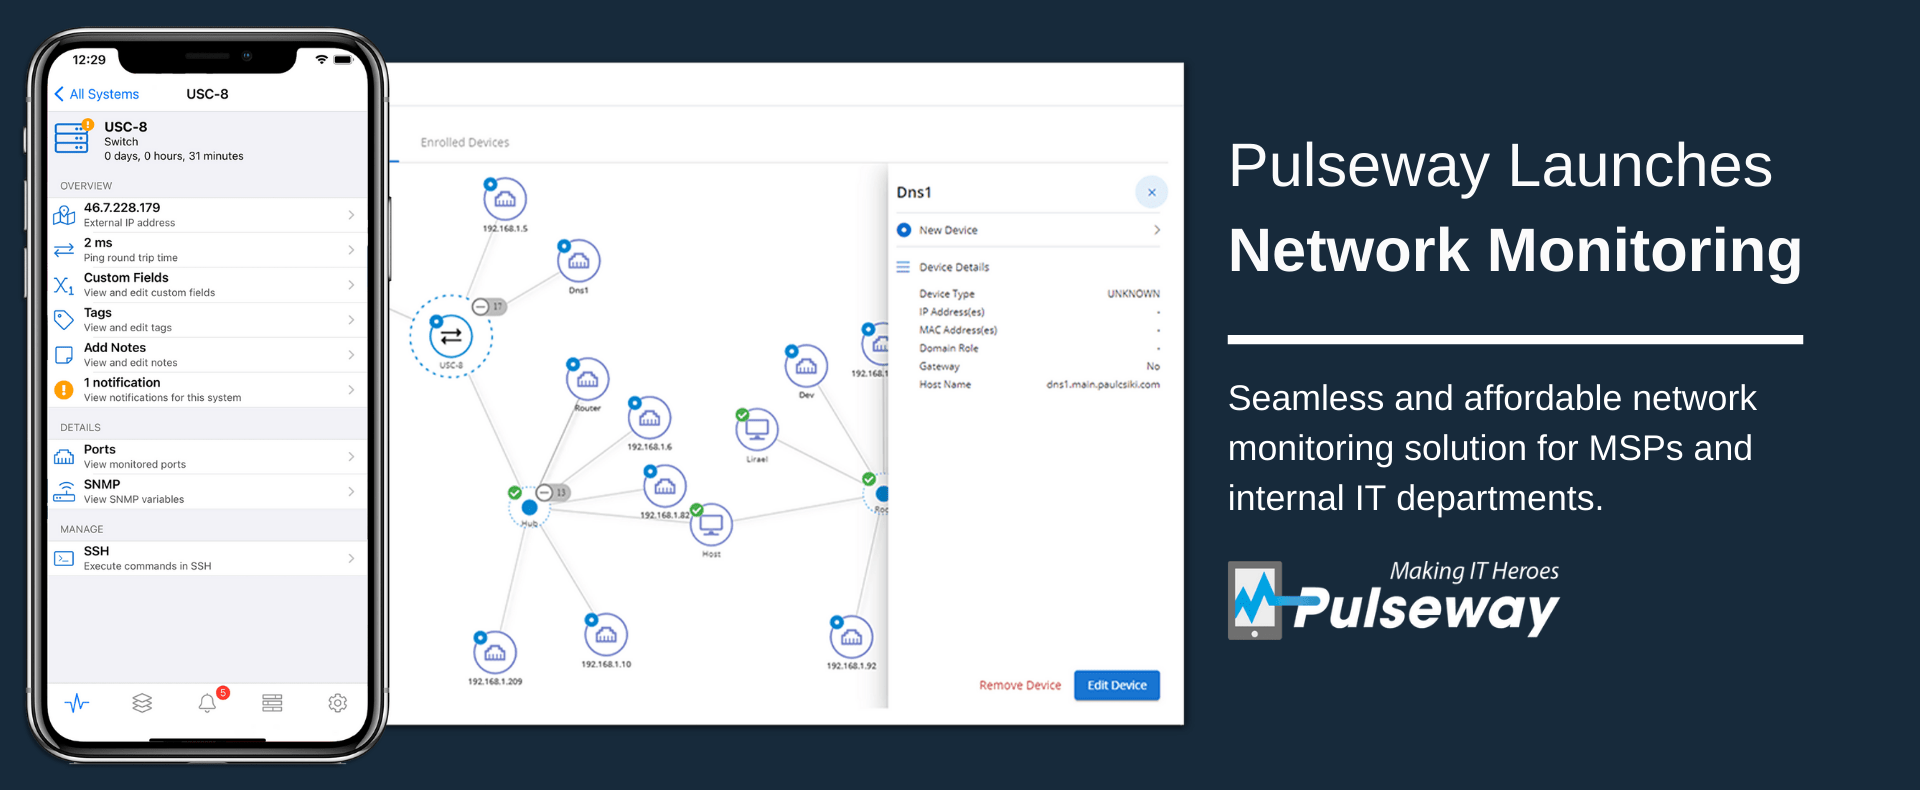 Pulseway Launches Network Monitoring